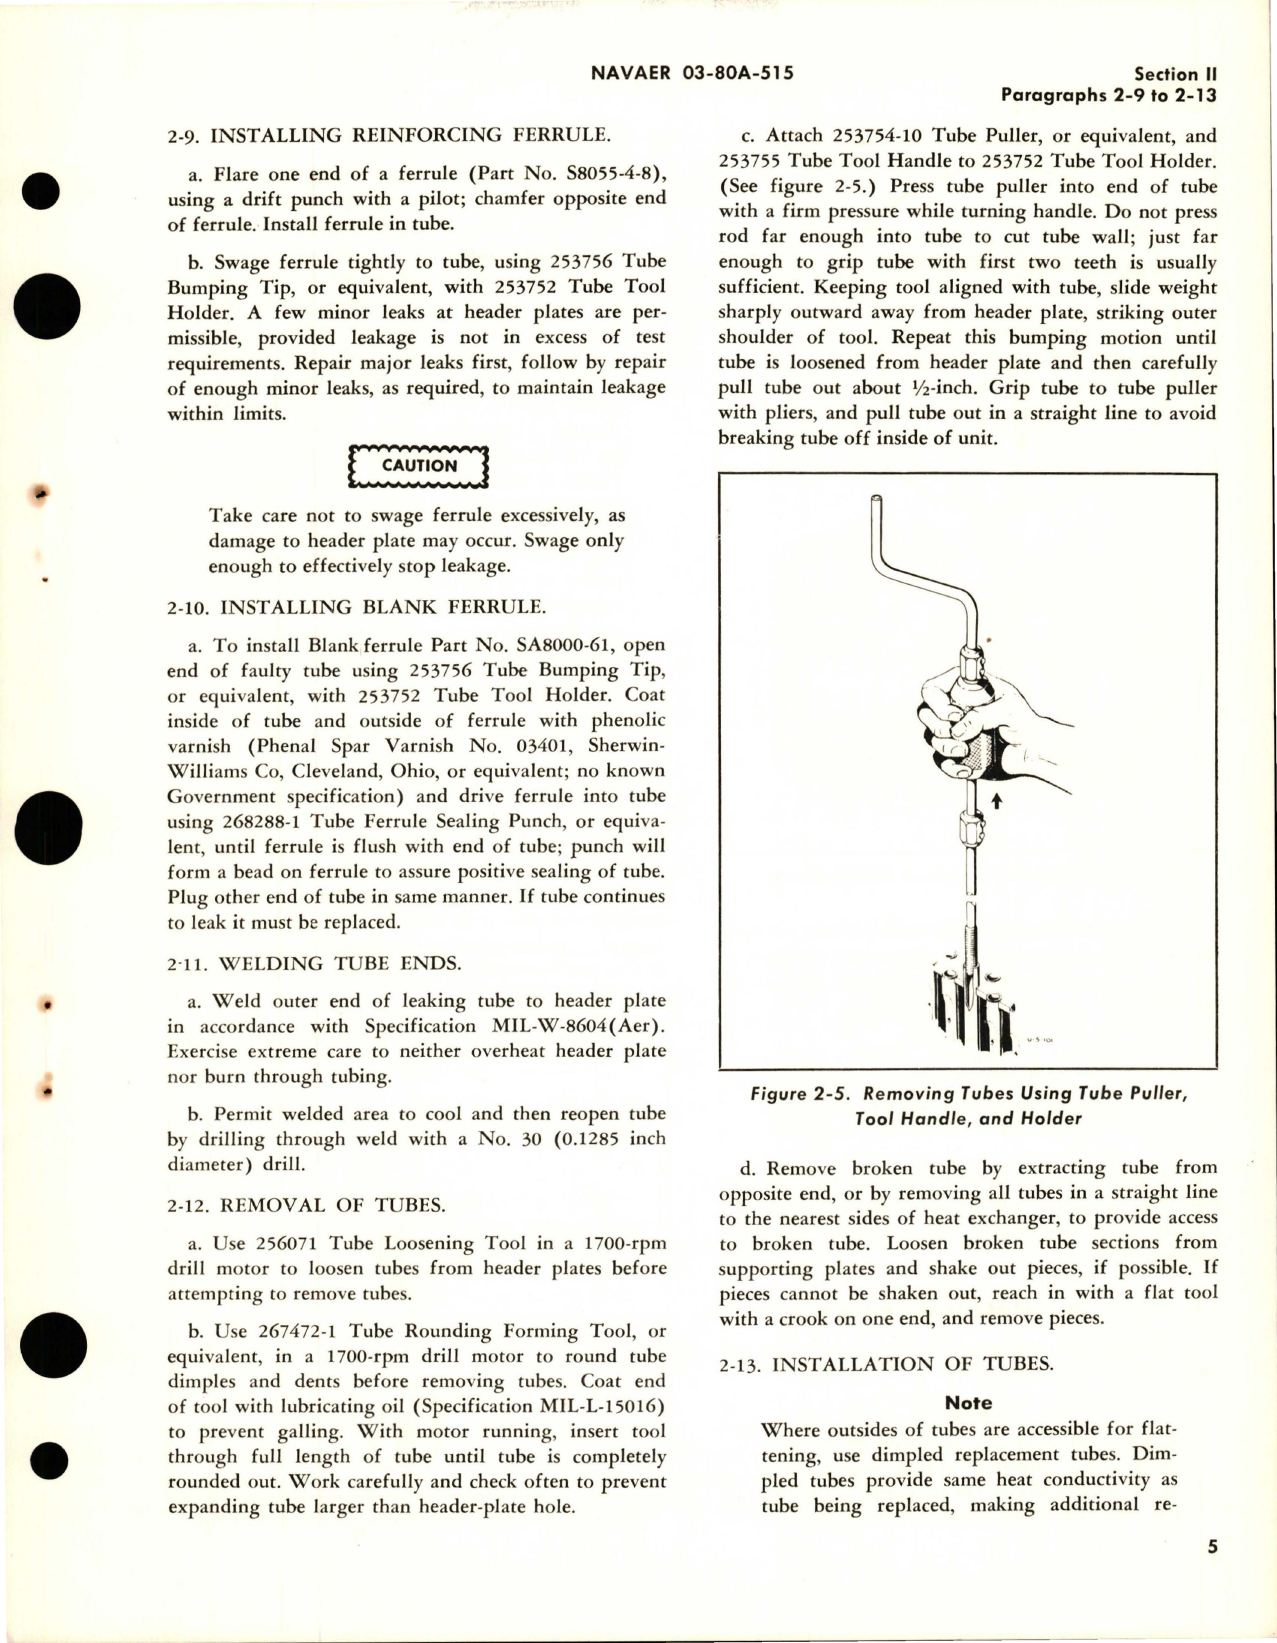 Sample page 9 from AirCorps Library document: Overhaul Instructions for Heat Exchangers 